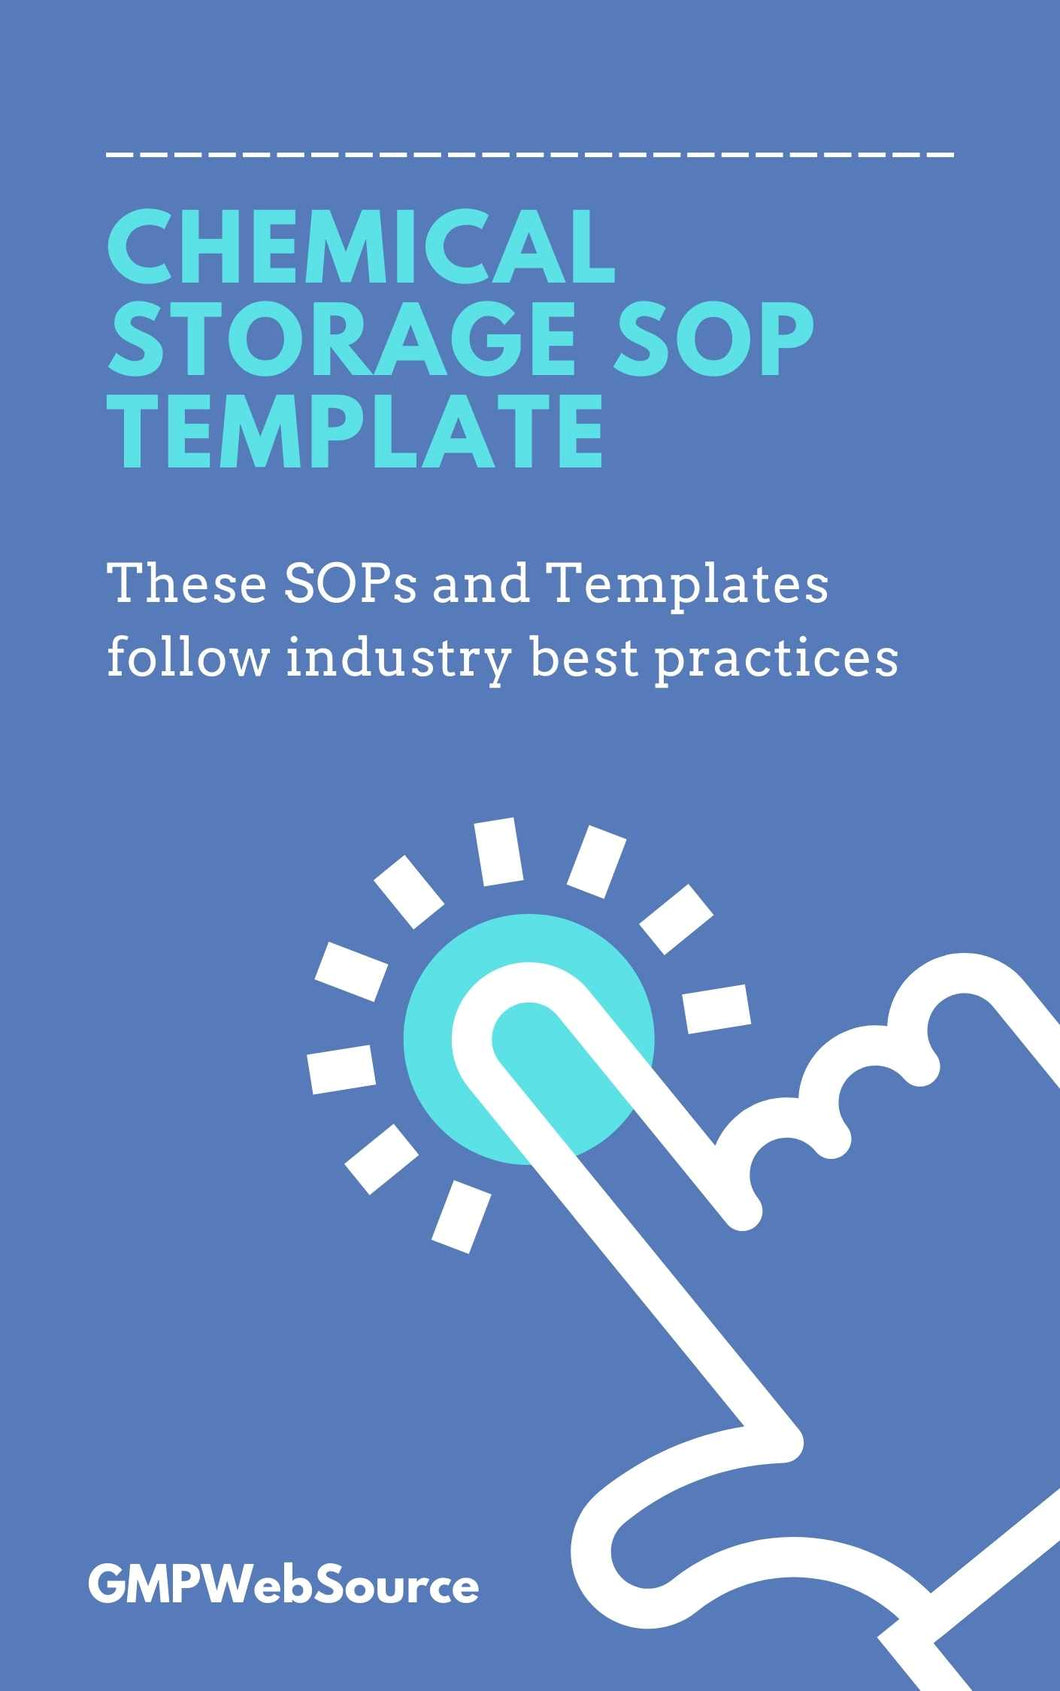 Chemical Storage and Handling SOP Template